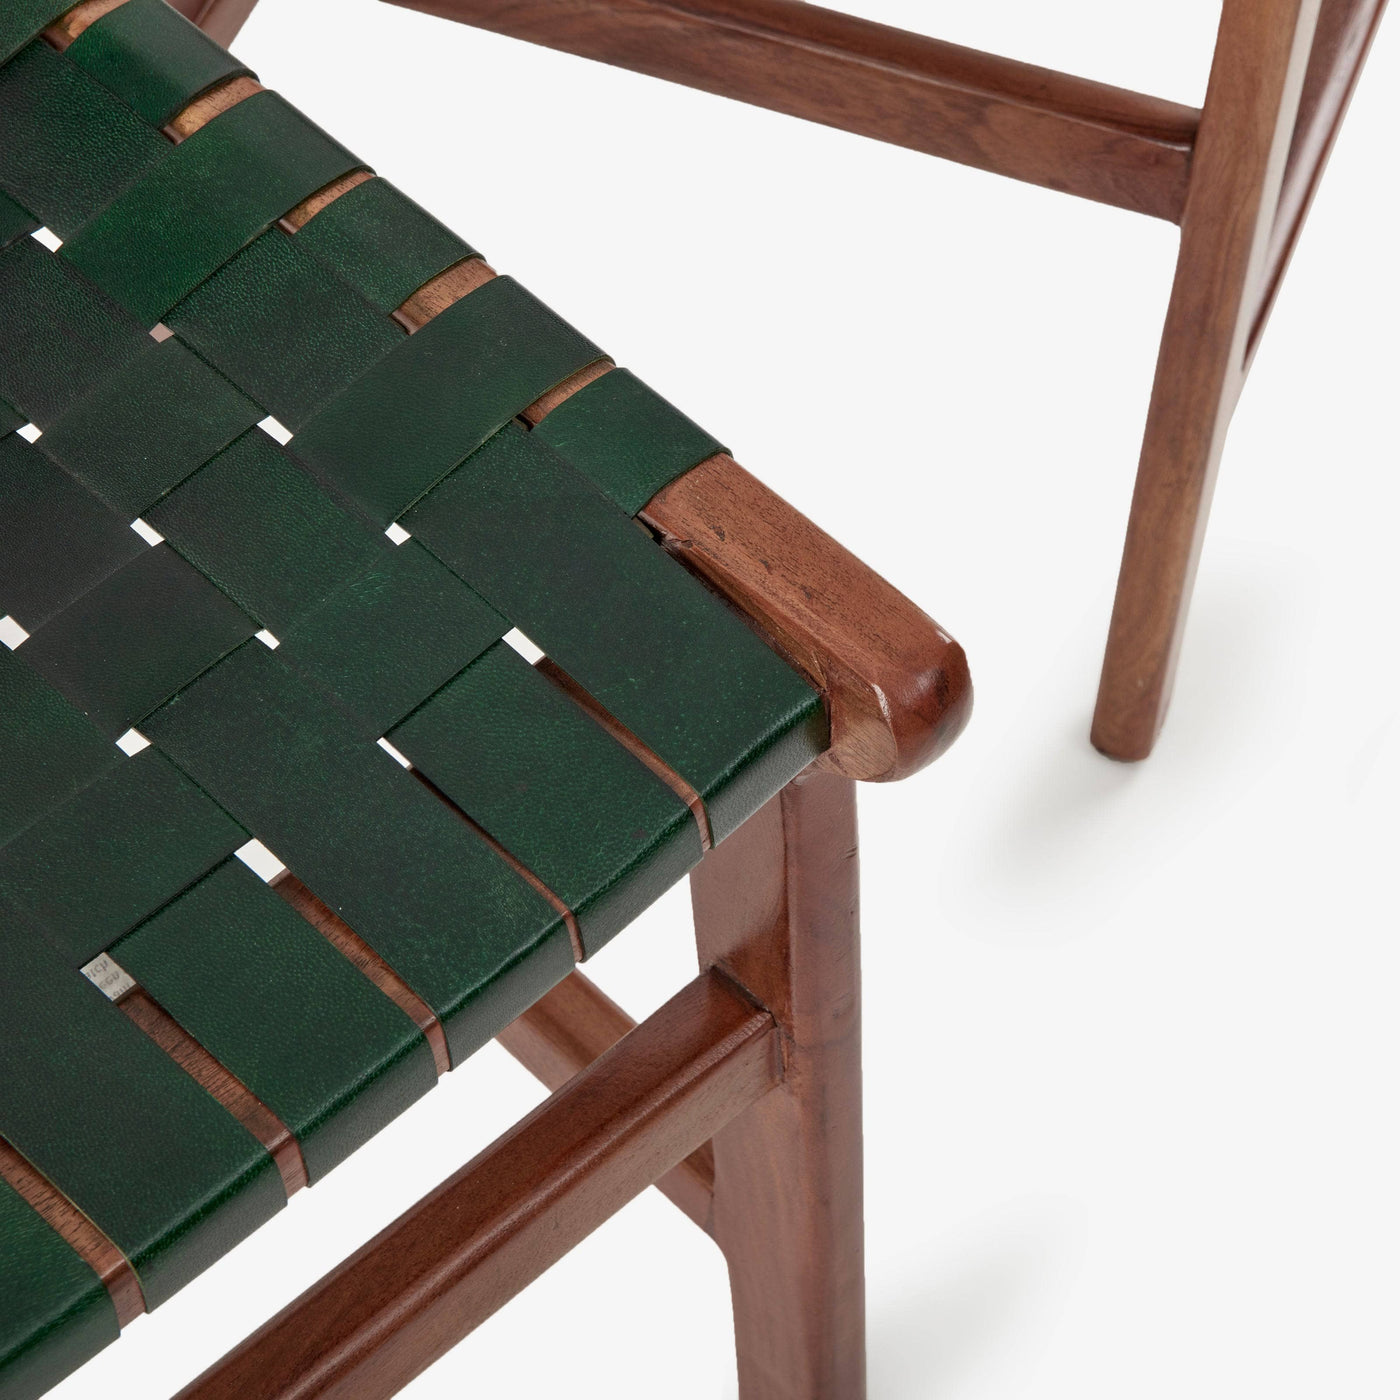 Pomero Woven Leather Dining Chair, Green Dining Chairs & Benches sazy.com